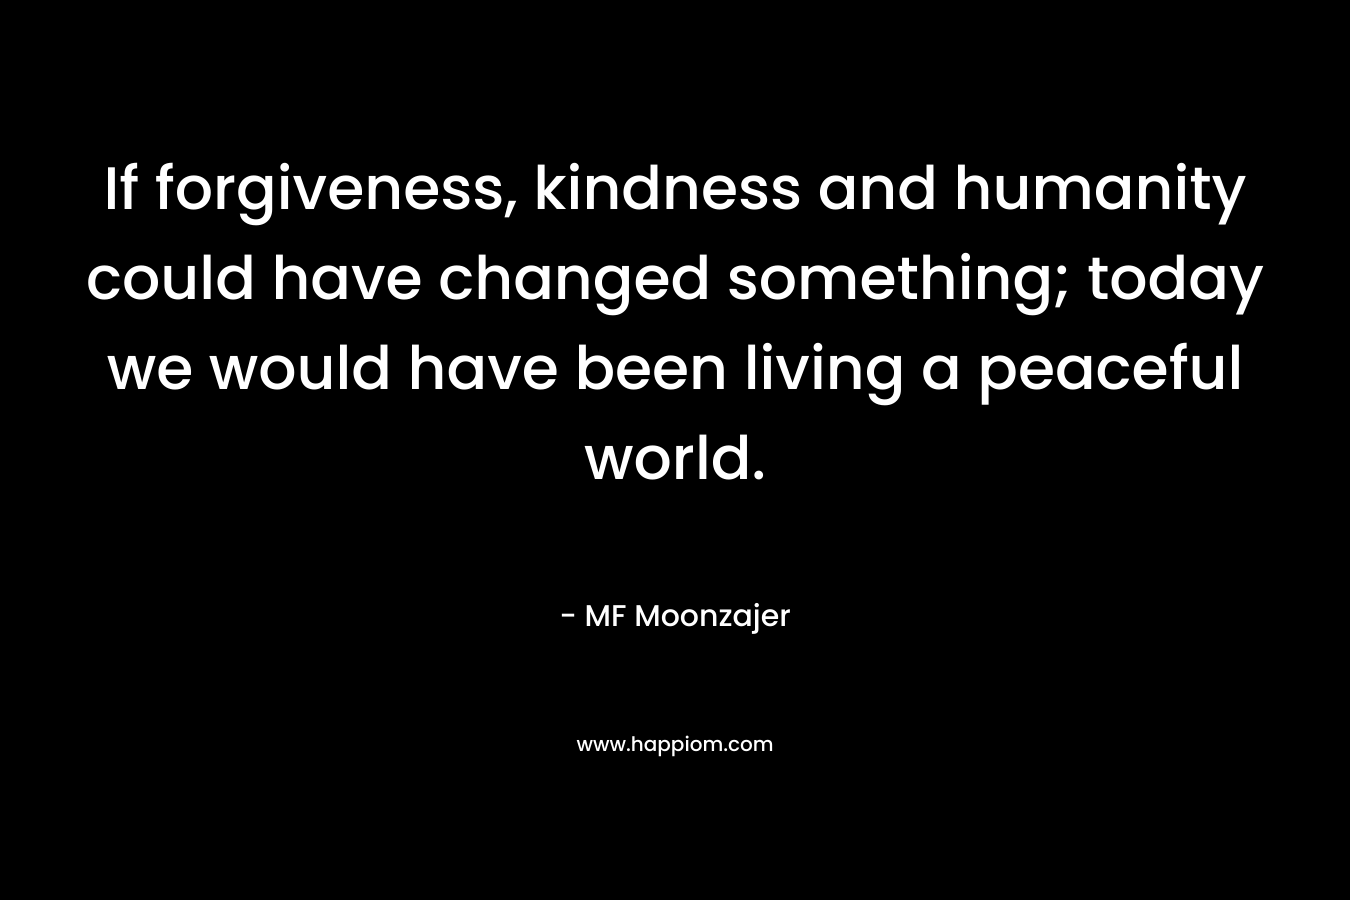 If forgiveness, kindness and humanity could have changed something; today we would have been living a peaceful world.